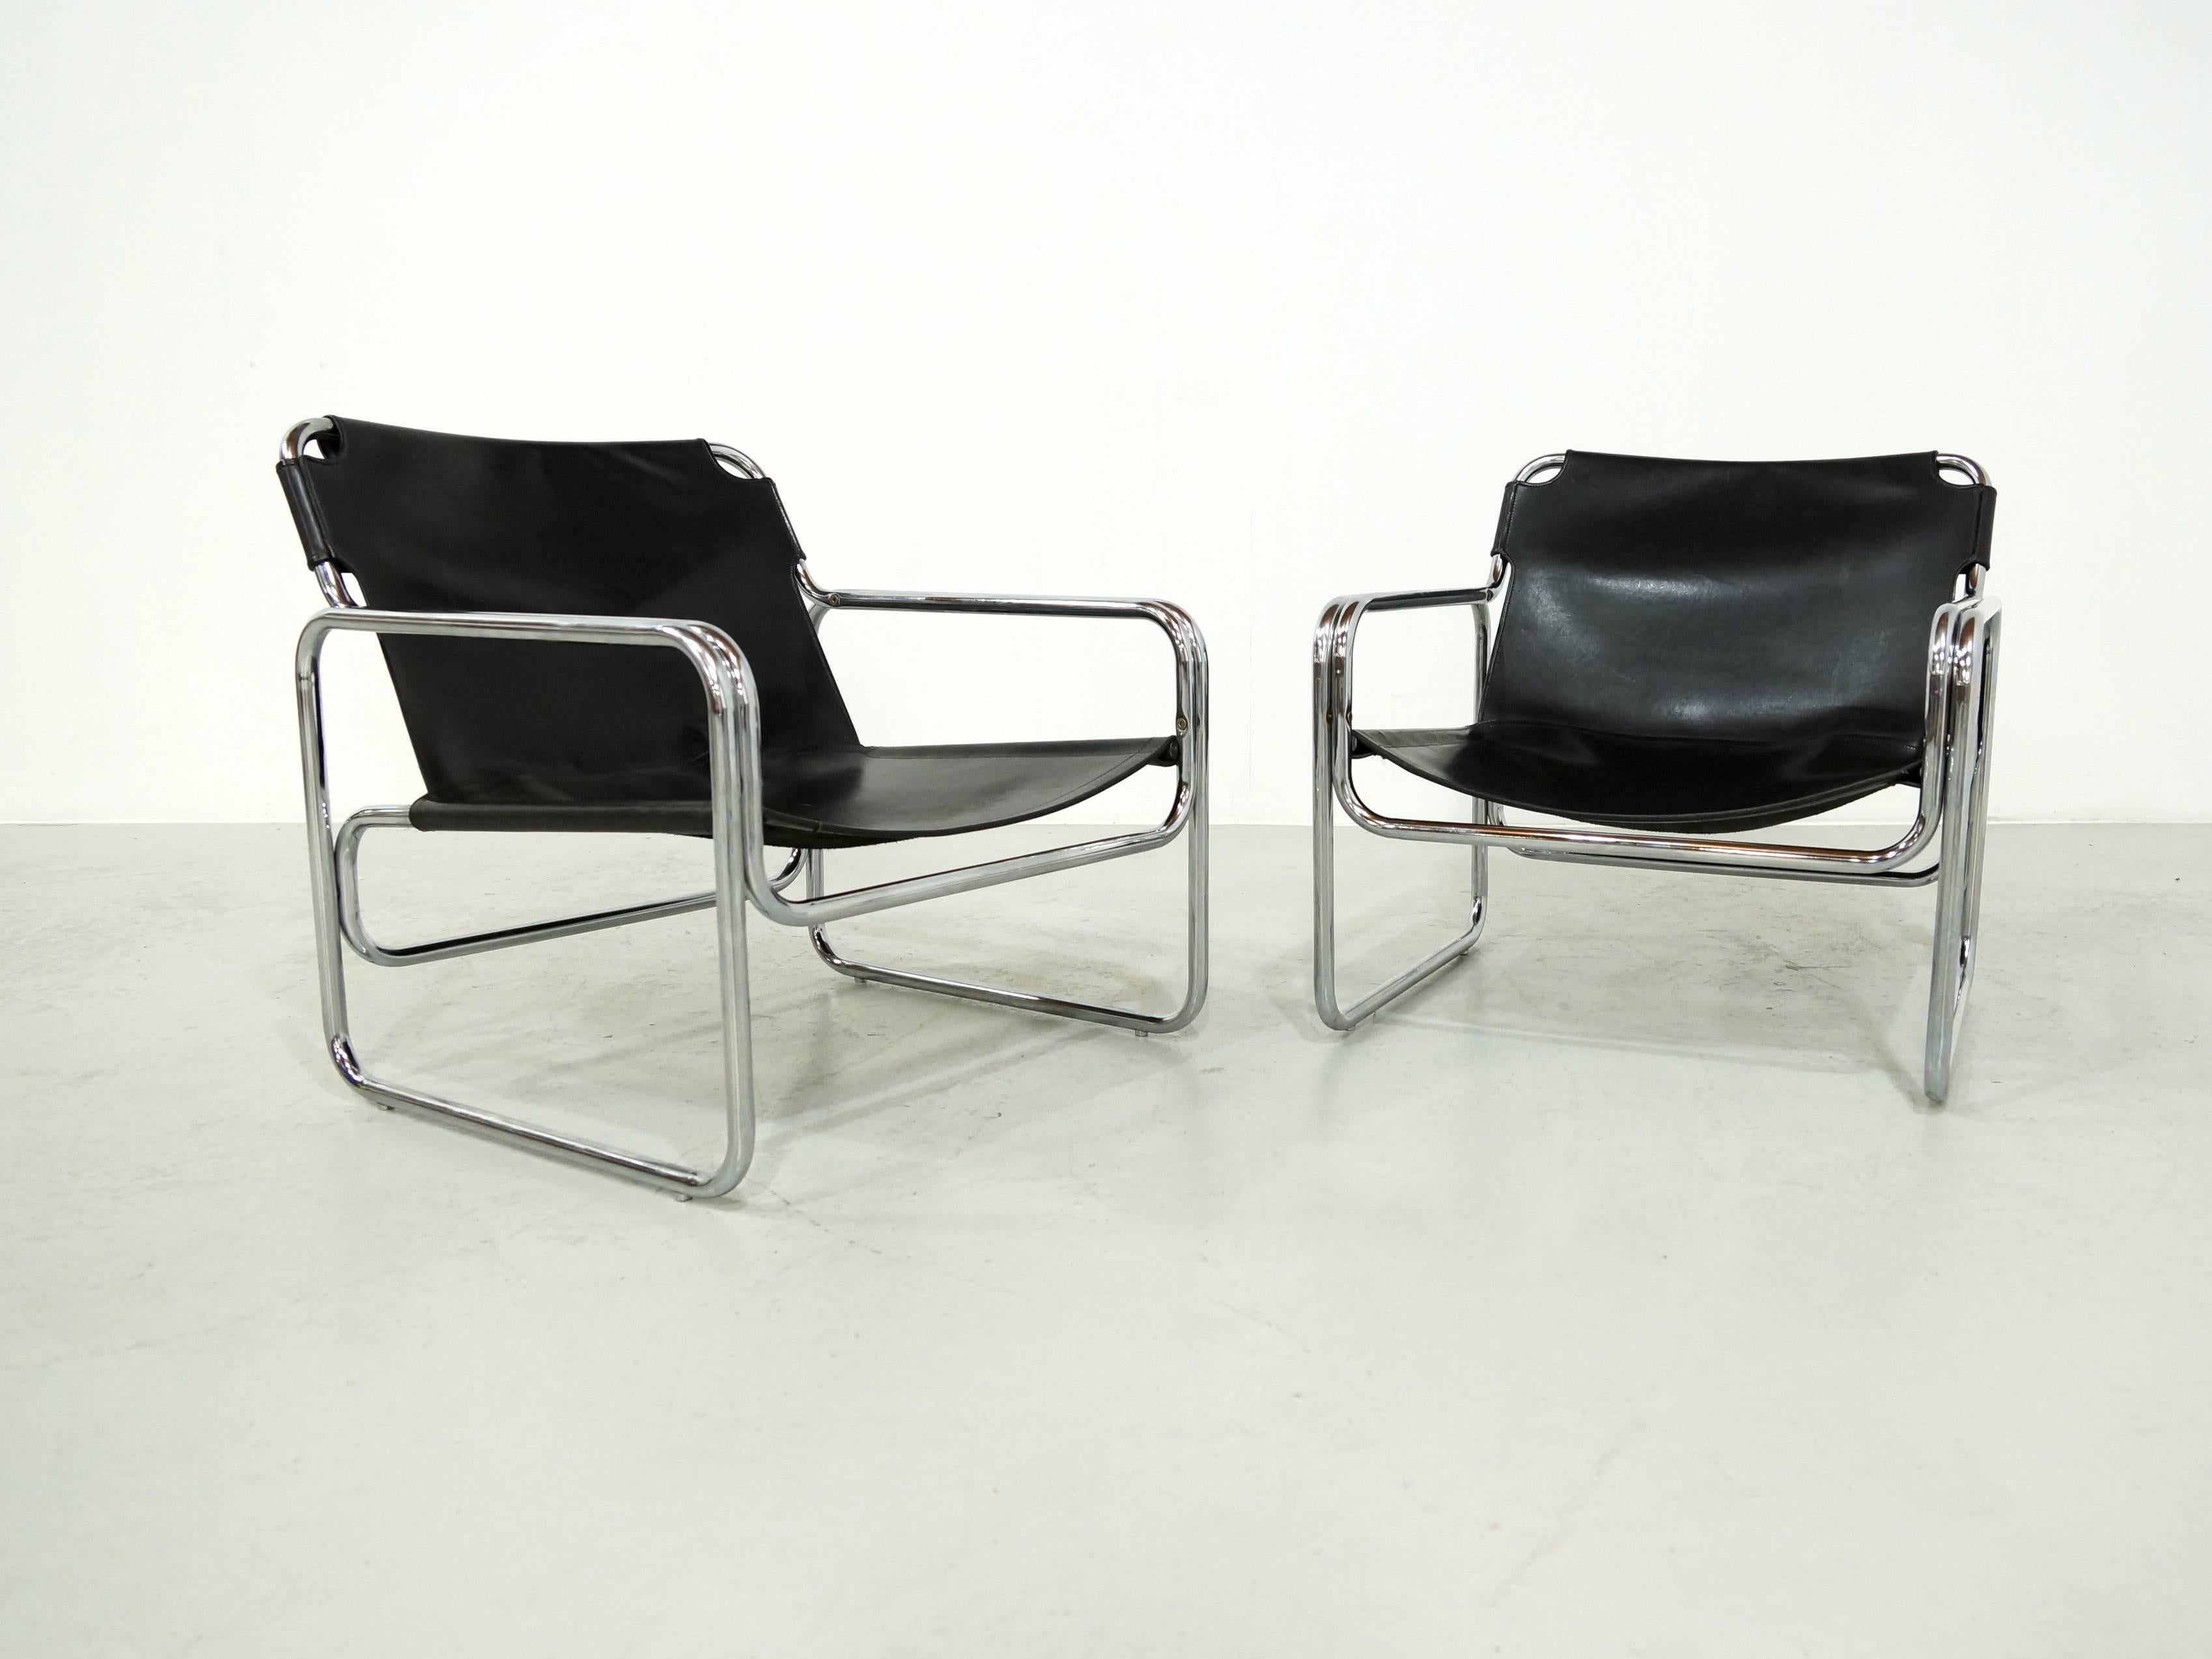 Pair of Antella Mosca Black Leather Lounge Chairs, Model Attico 1970, s  In Good Condition In 's Heer Arendskerke, NL